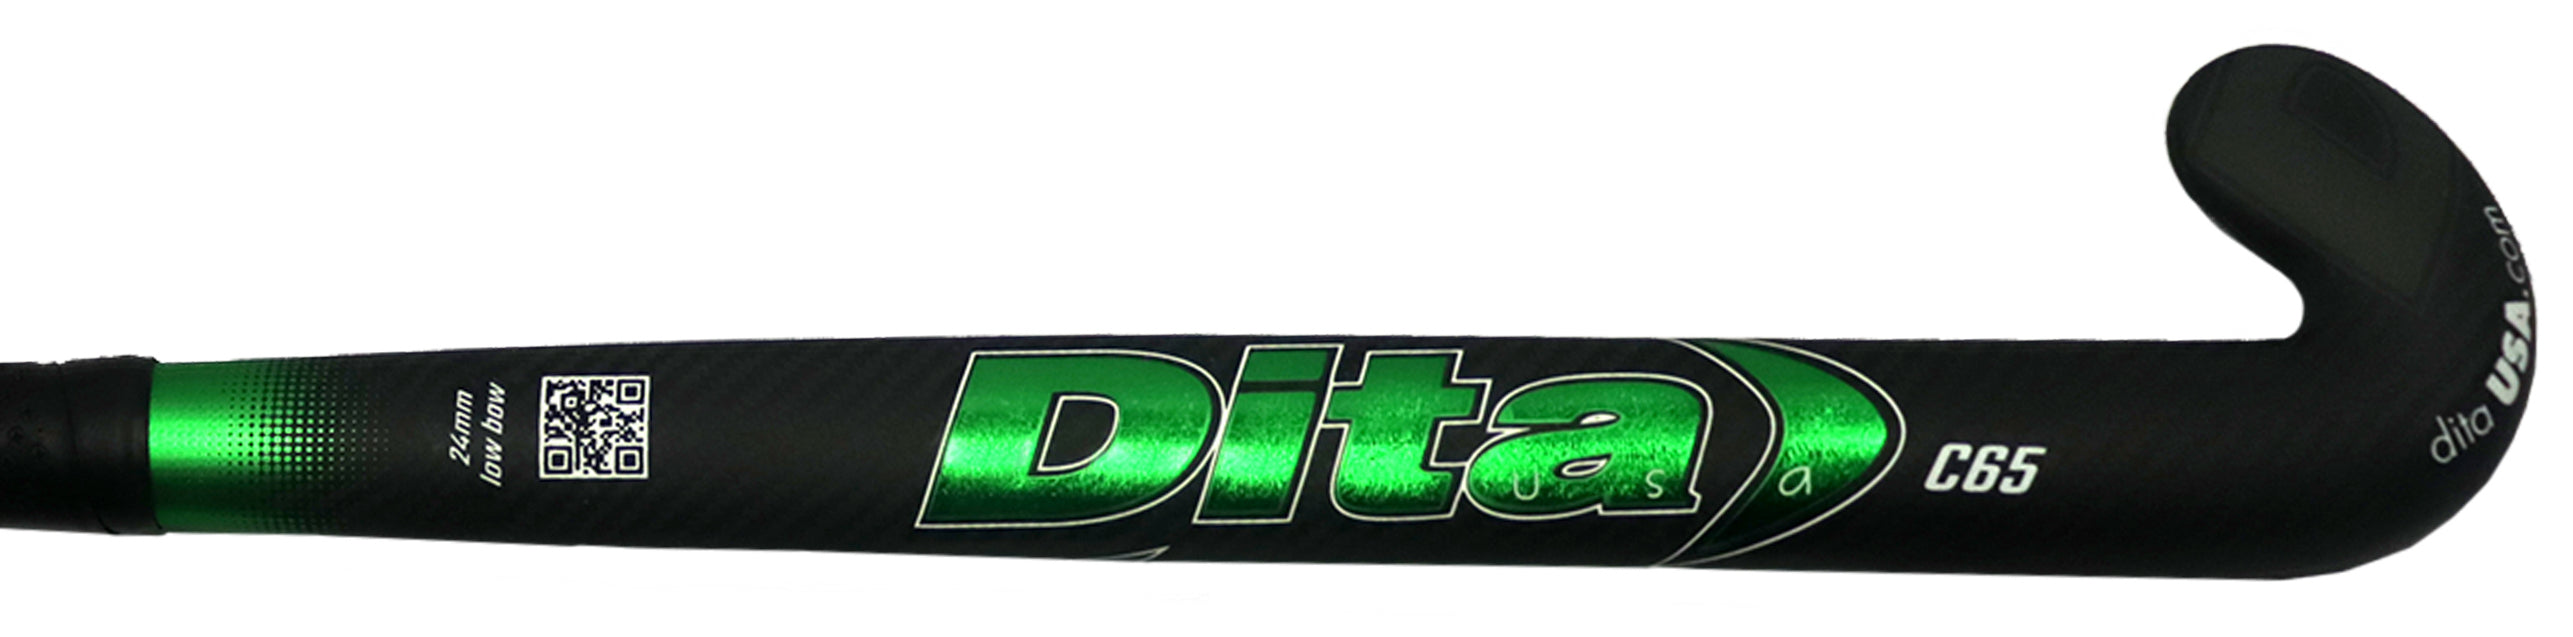 Dita USA C65 Green Low Bow - For Advanced Skill, Easy Lifts